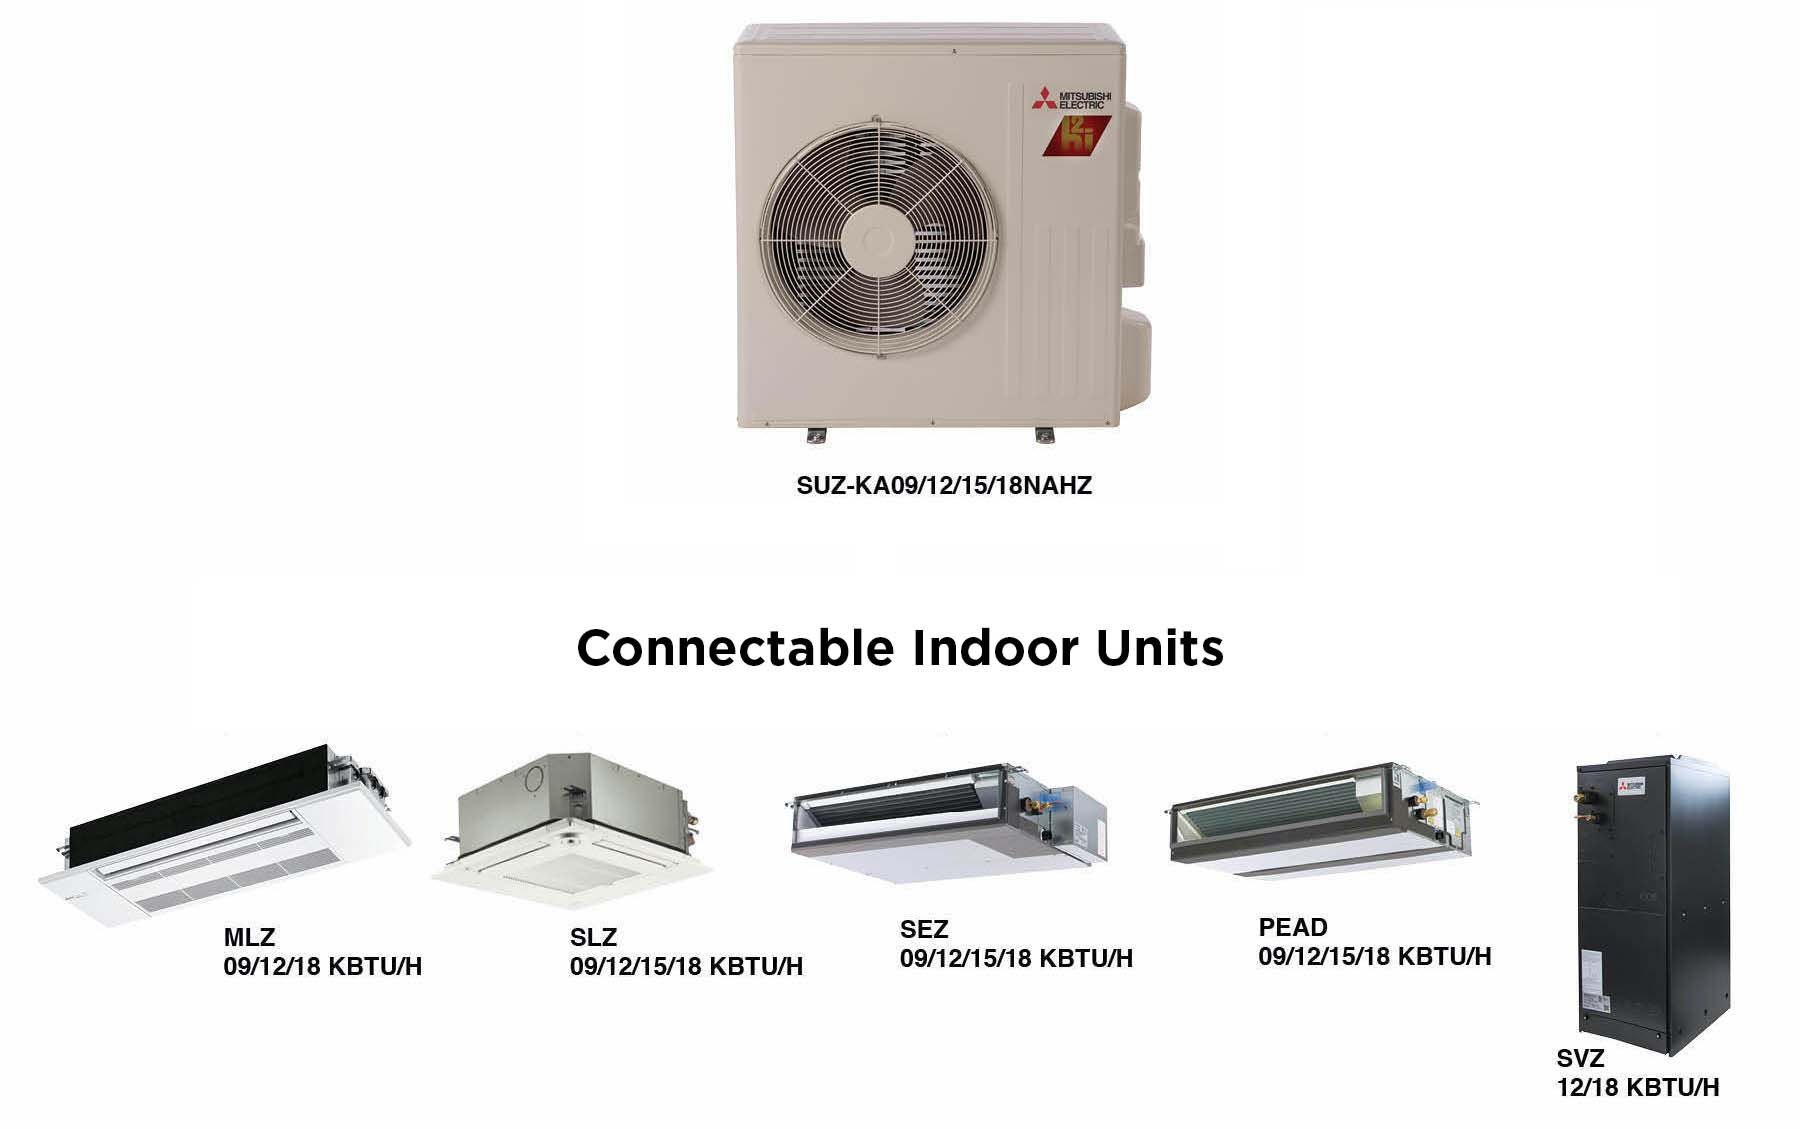 SUZ Universal Outdoor Unit with Hyper-Heating INVERTER (H2i) Technology.